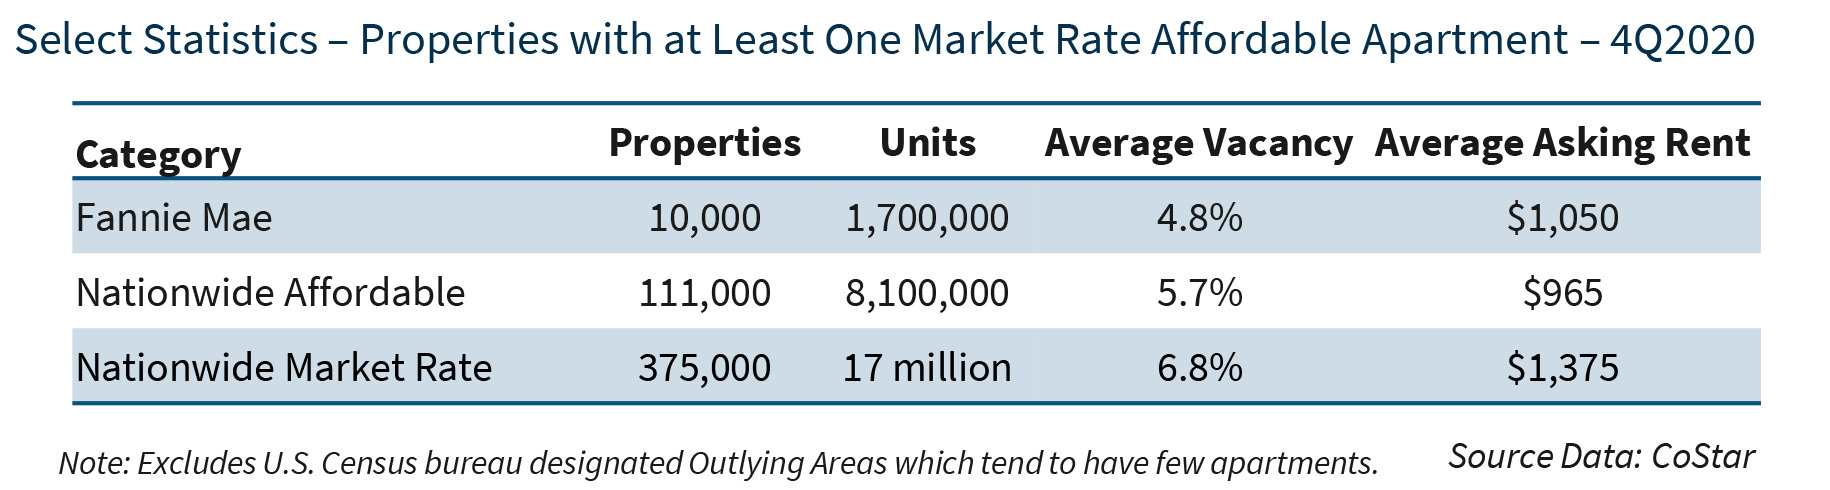 Select Statistics – Properties with at Least One Market Rate Affordable Apartment – 4Q2020